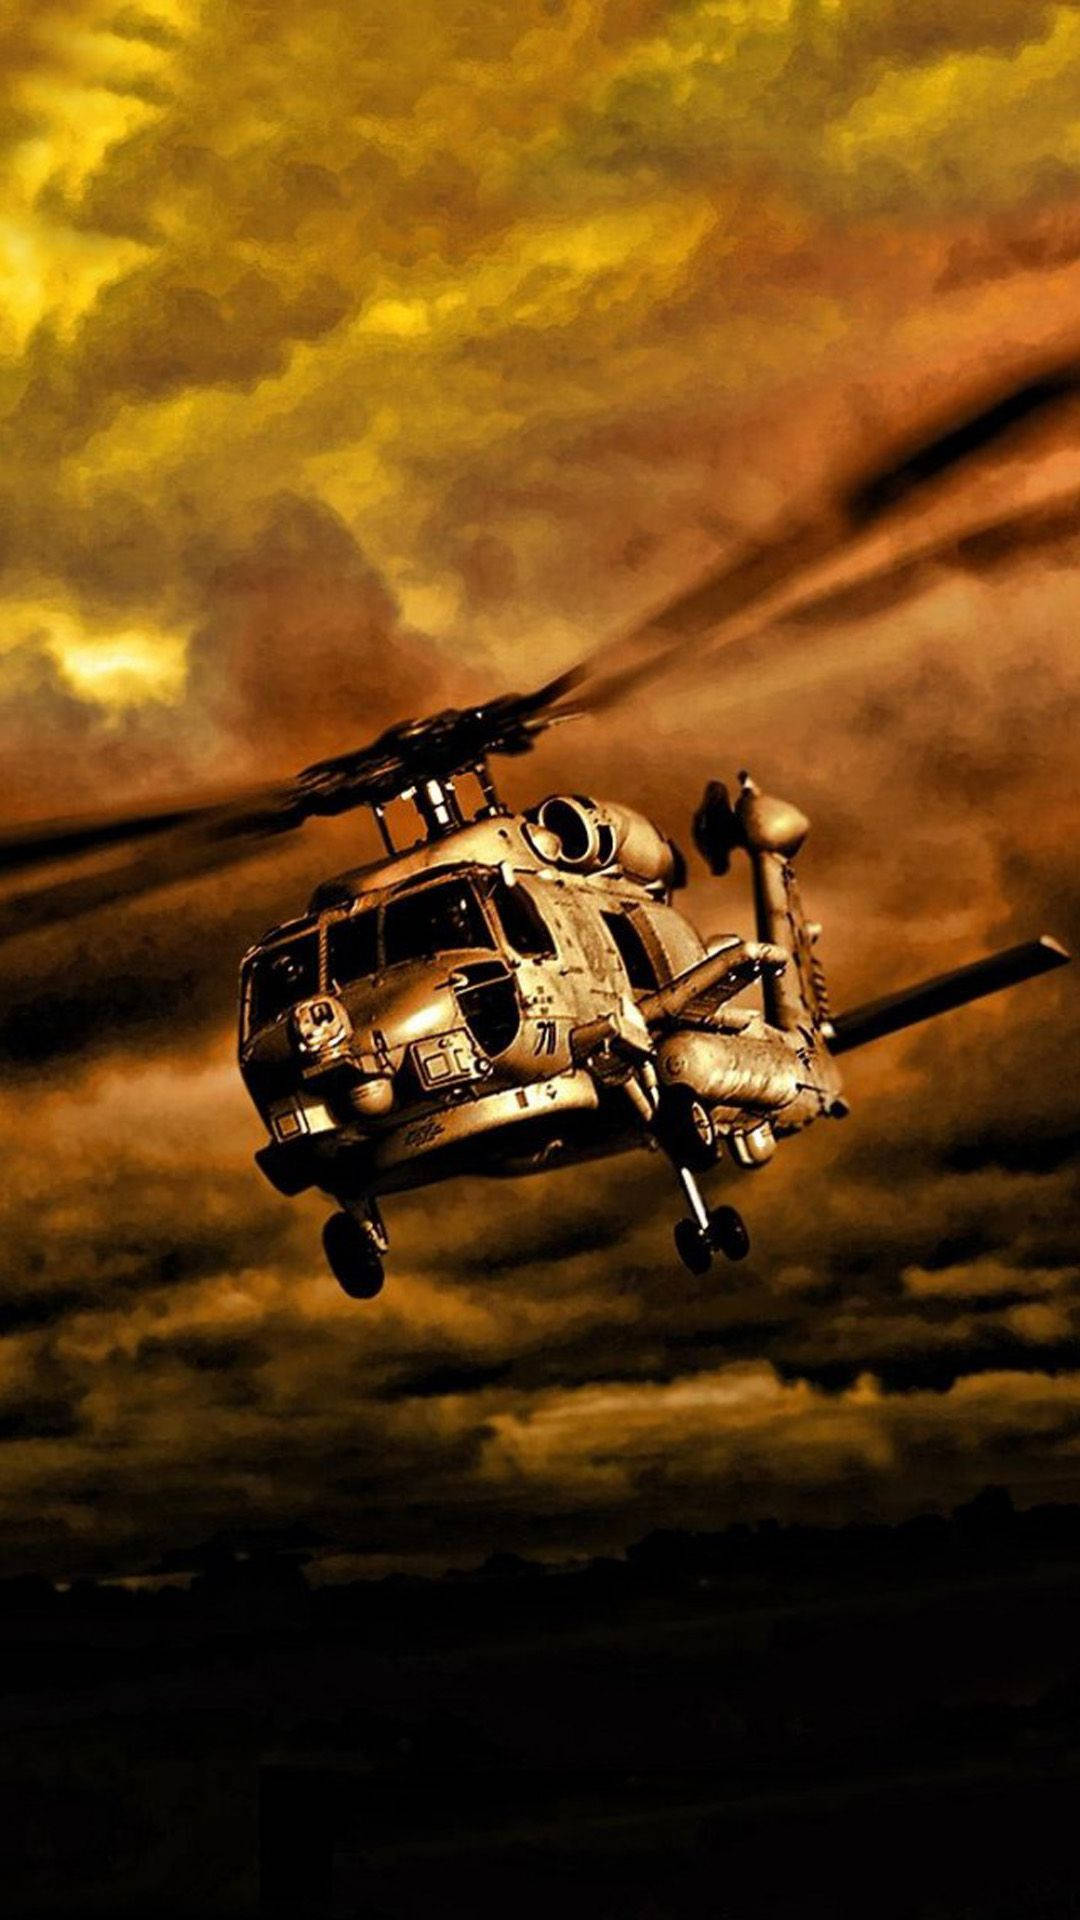 Hd Attack Military Helicopter Wallpaper